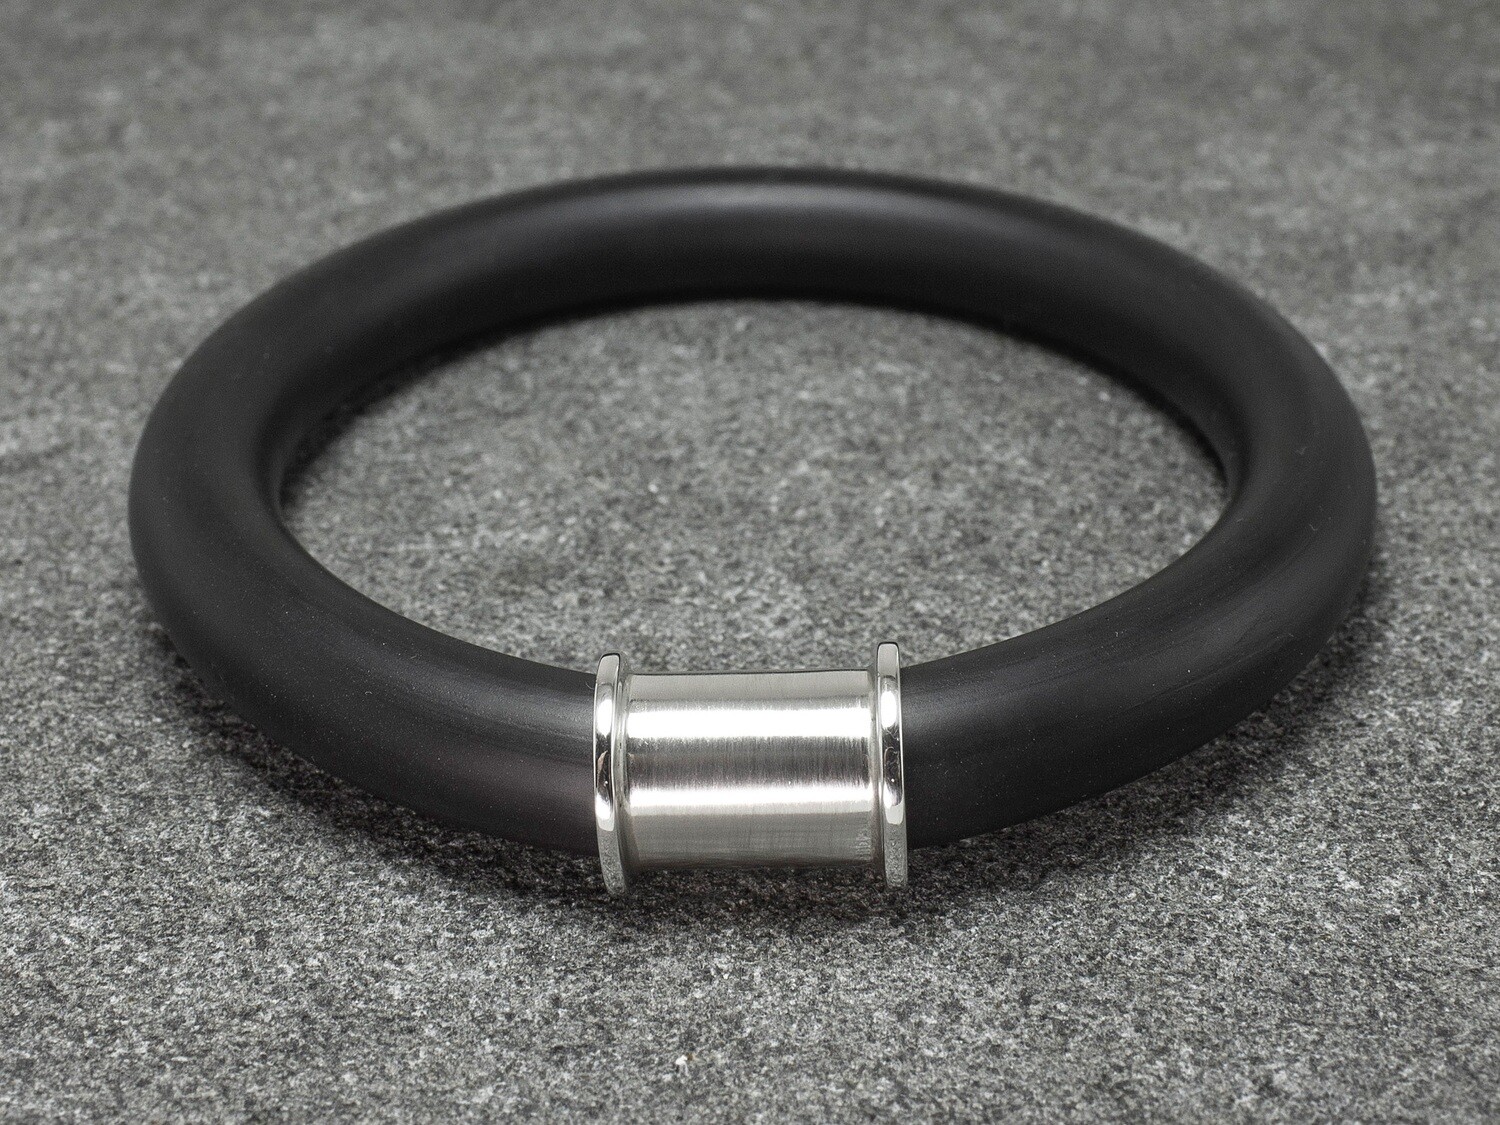 Modern Bracelet made of silver and caoutchouc